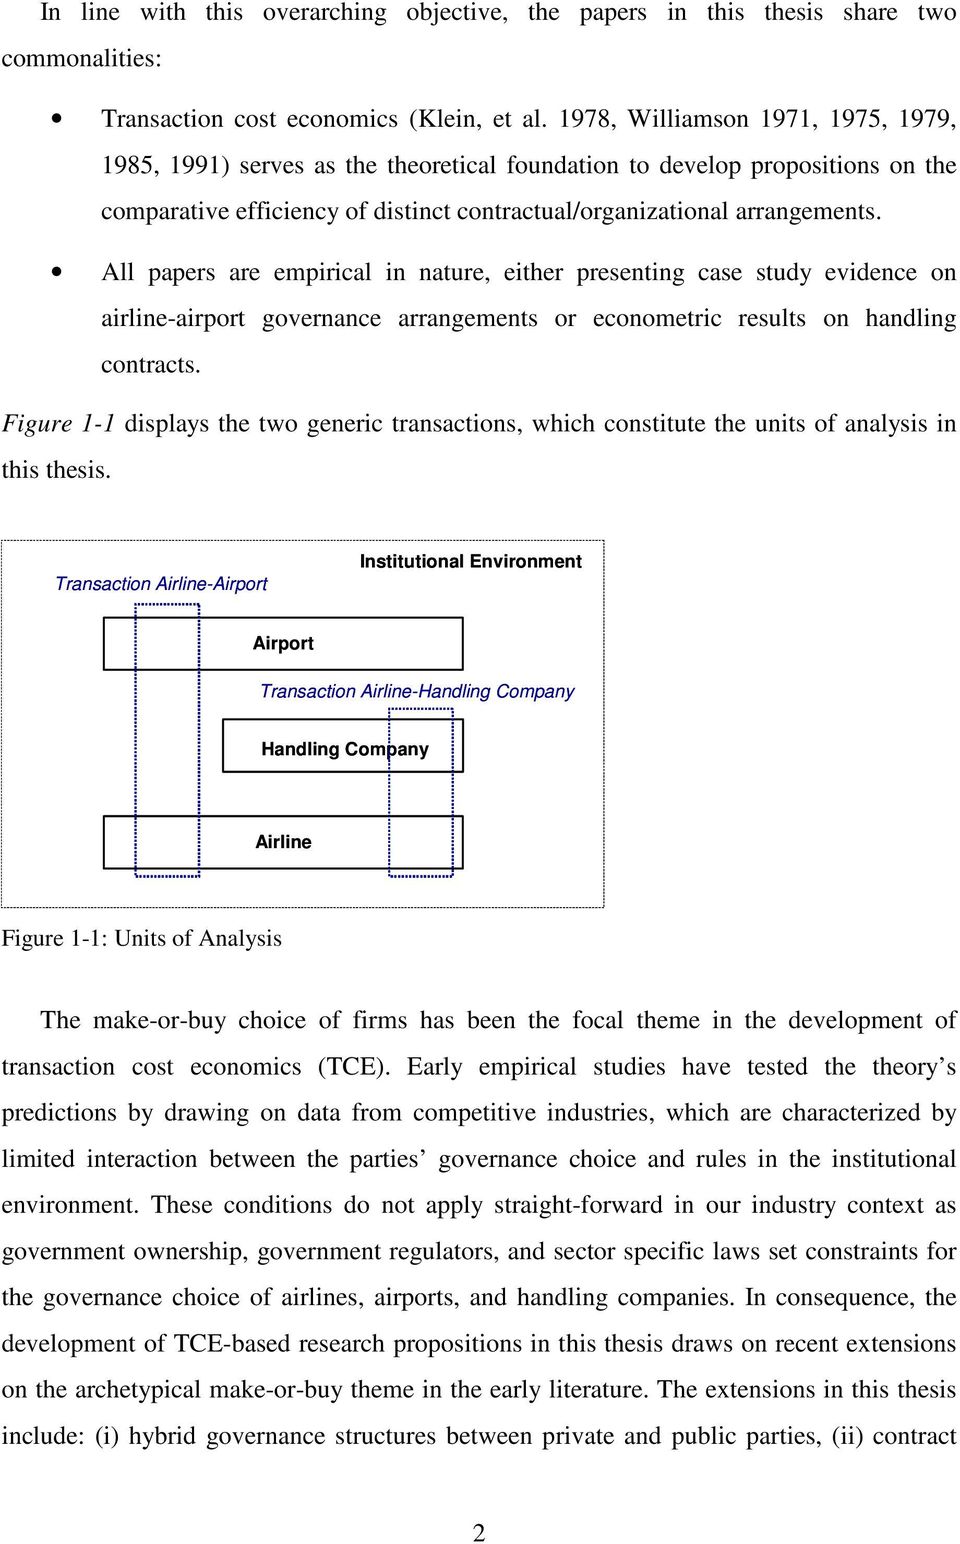 All papers are empirical in nature, either presenting case study evidence on airline-airport governance arrangements or econometric results on handling contracts.